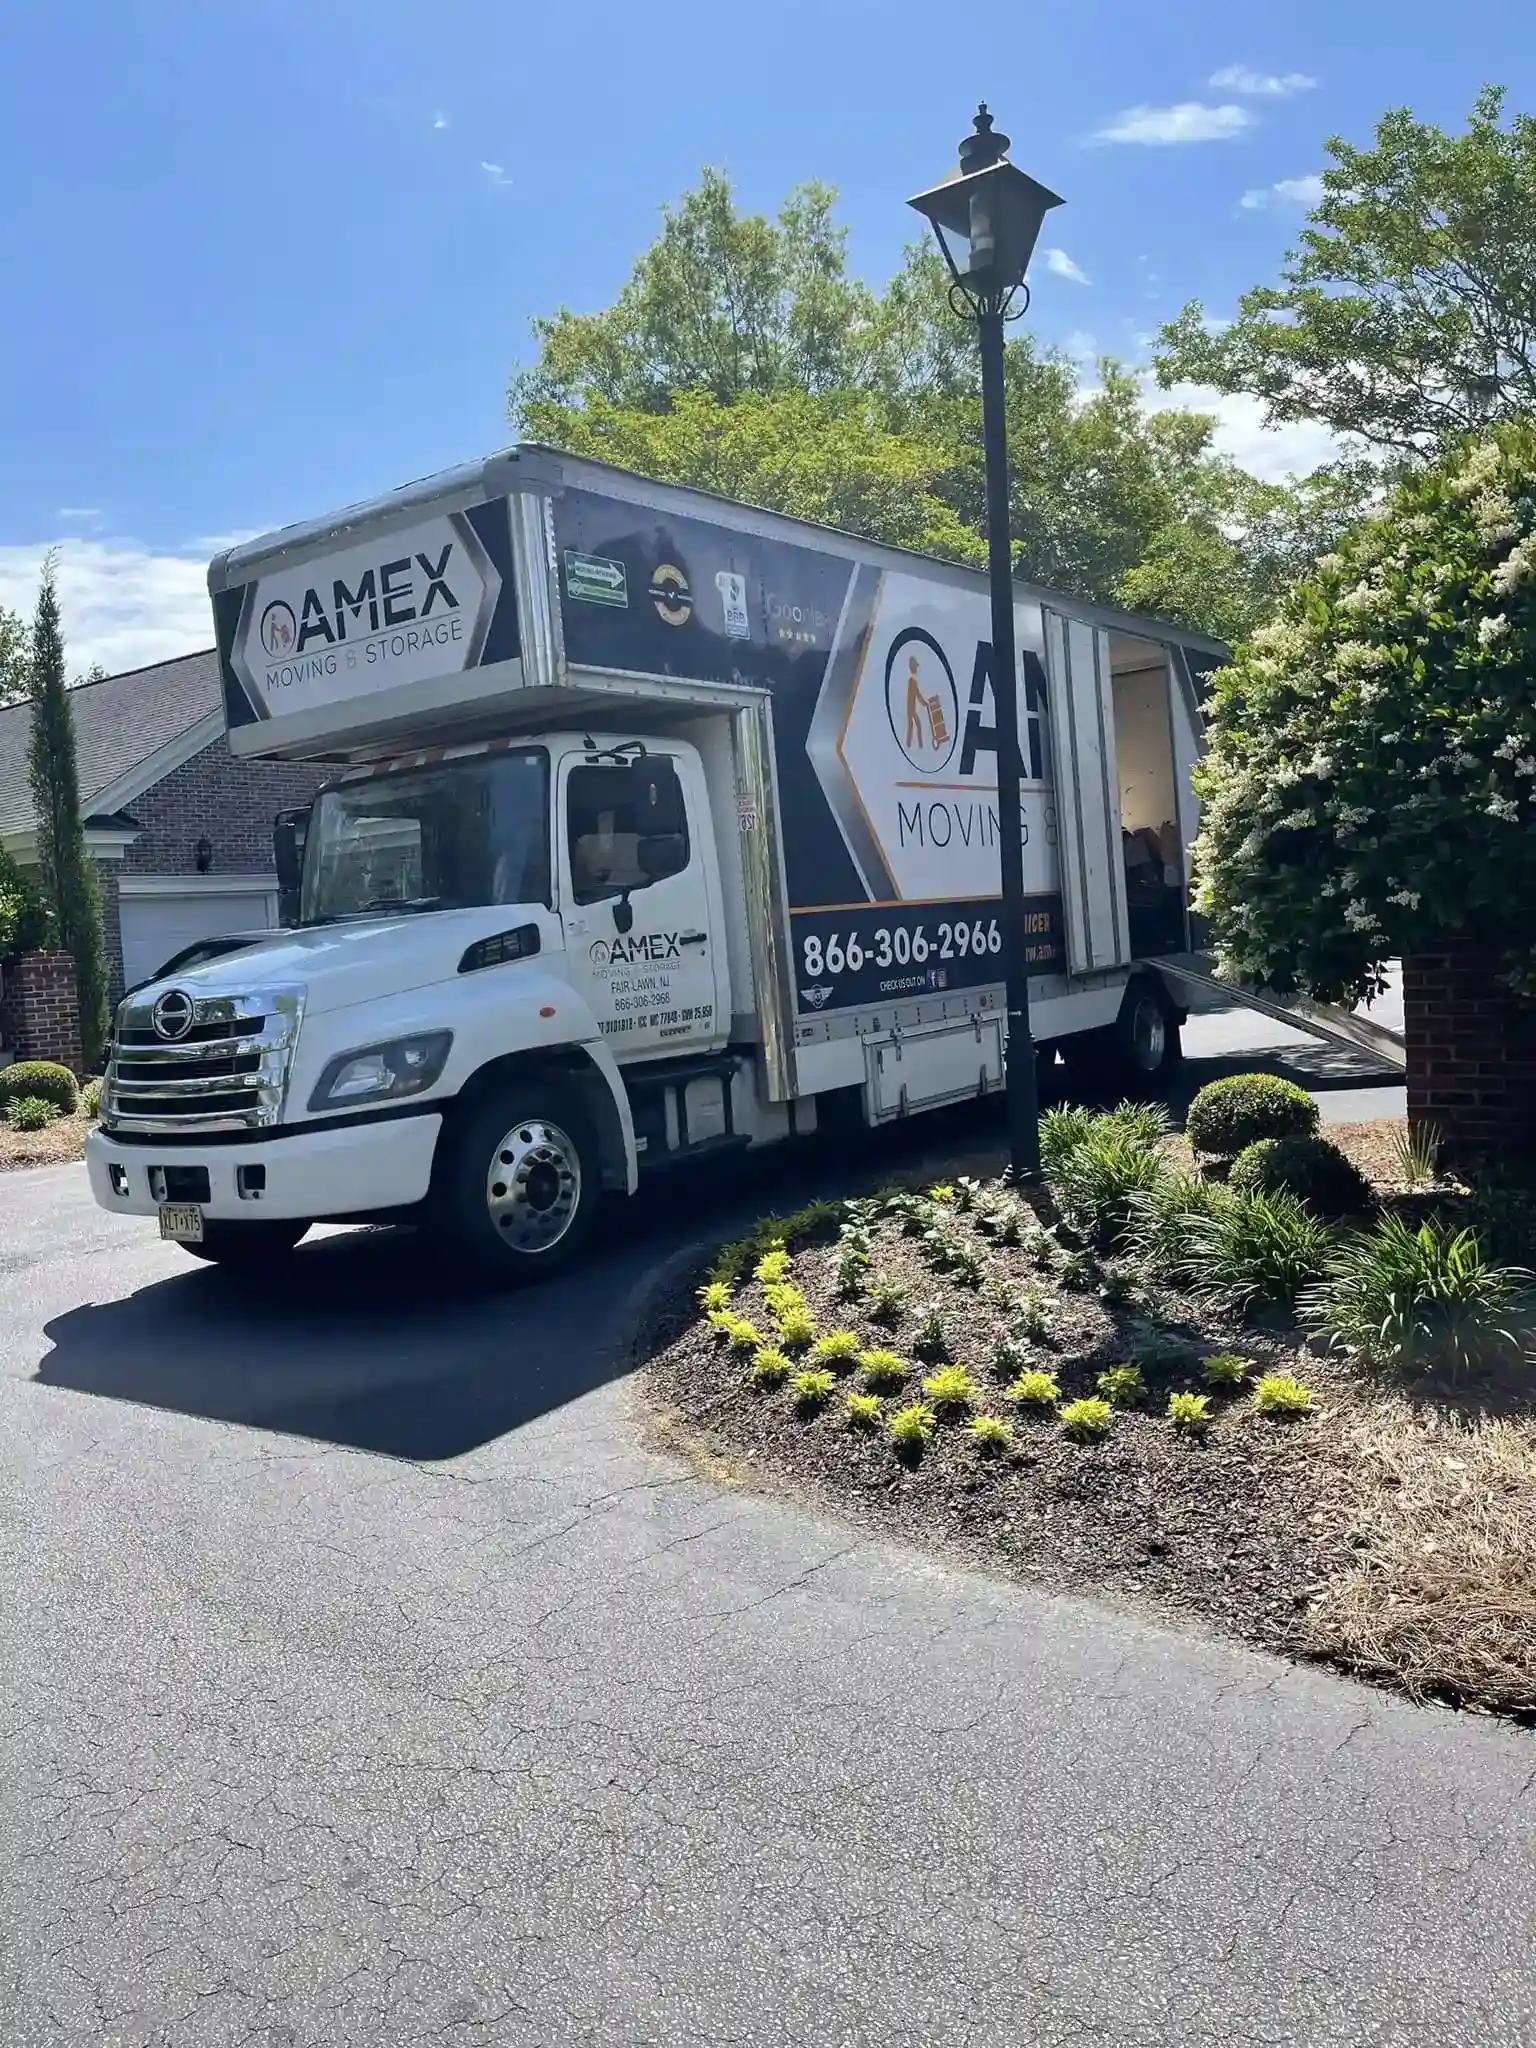 Commercial Move? Call AMEX Moving & Storage